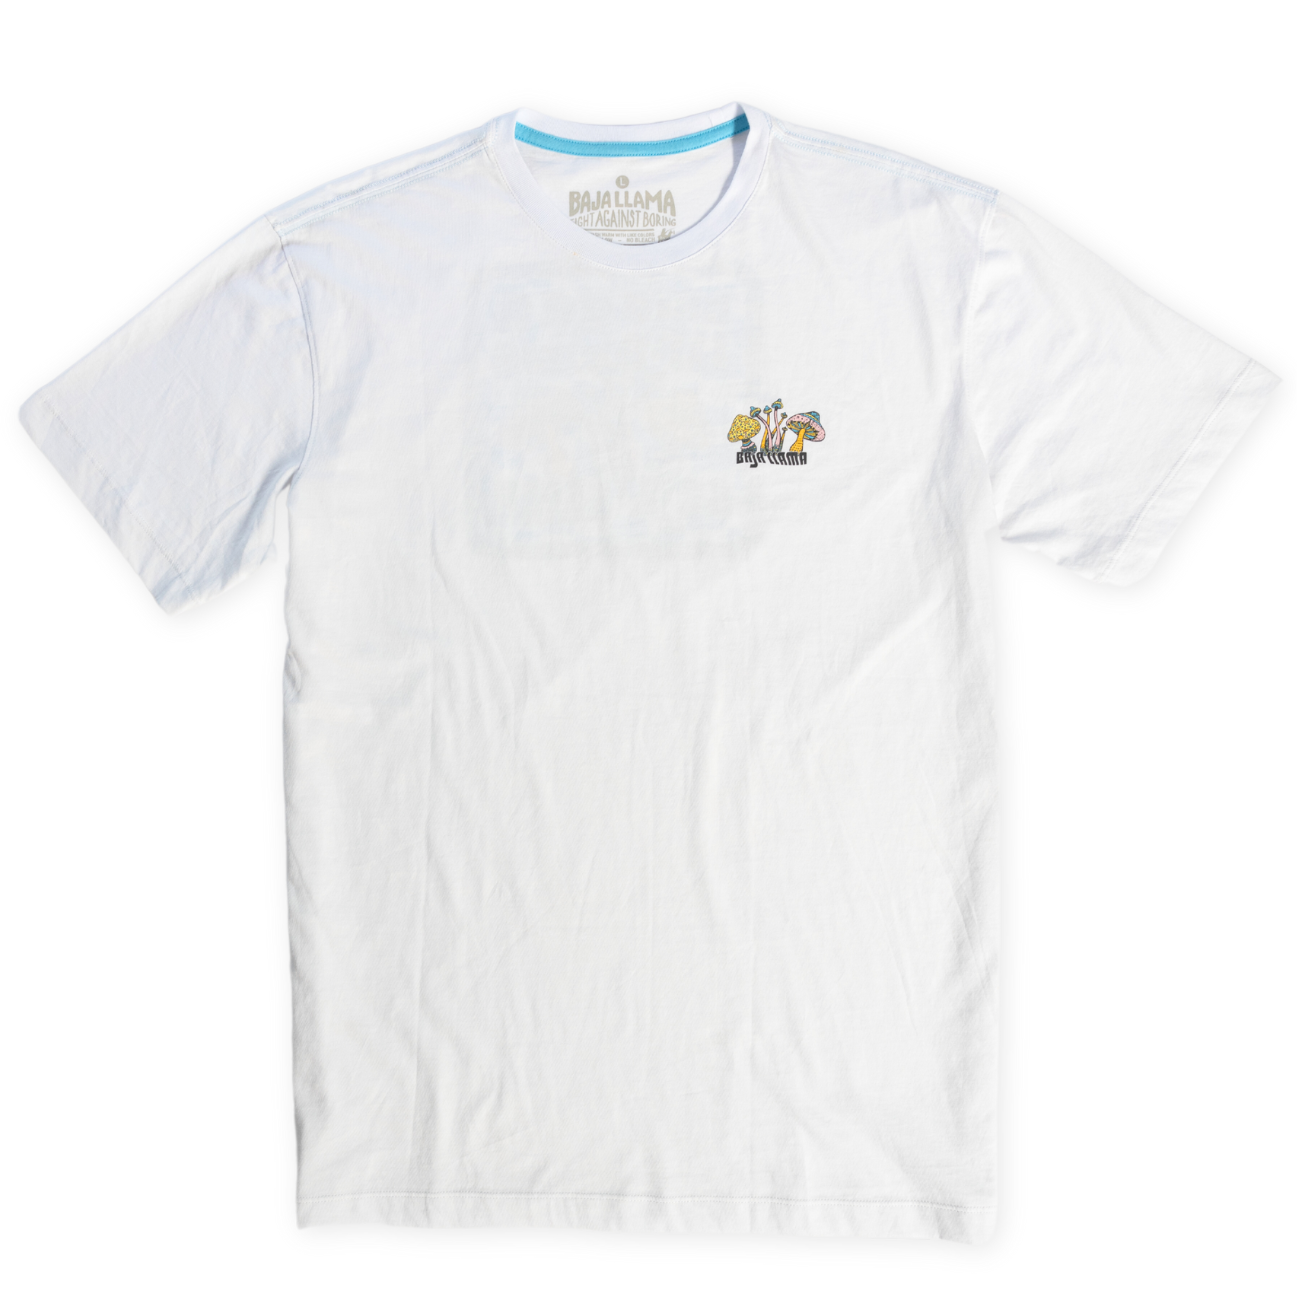 A TRIP OF A LIFETIME - WHITE PRIMO GRAPHIC TEE